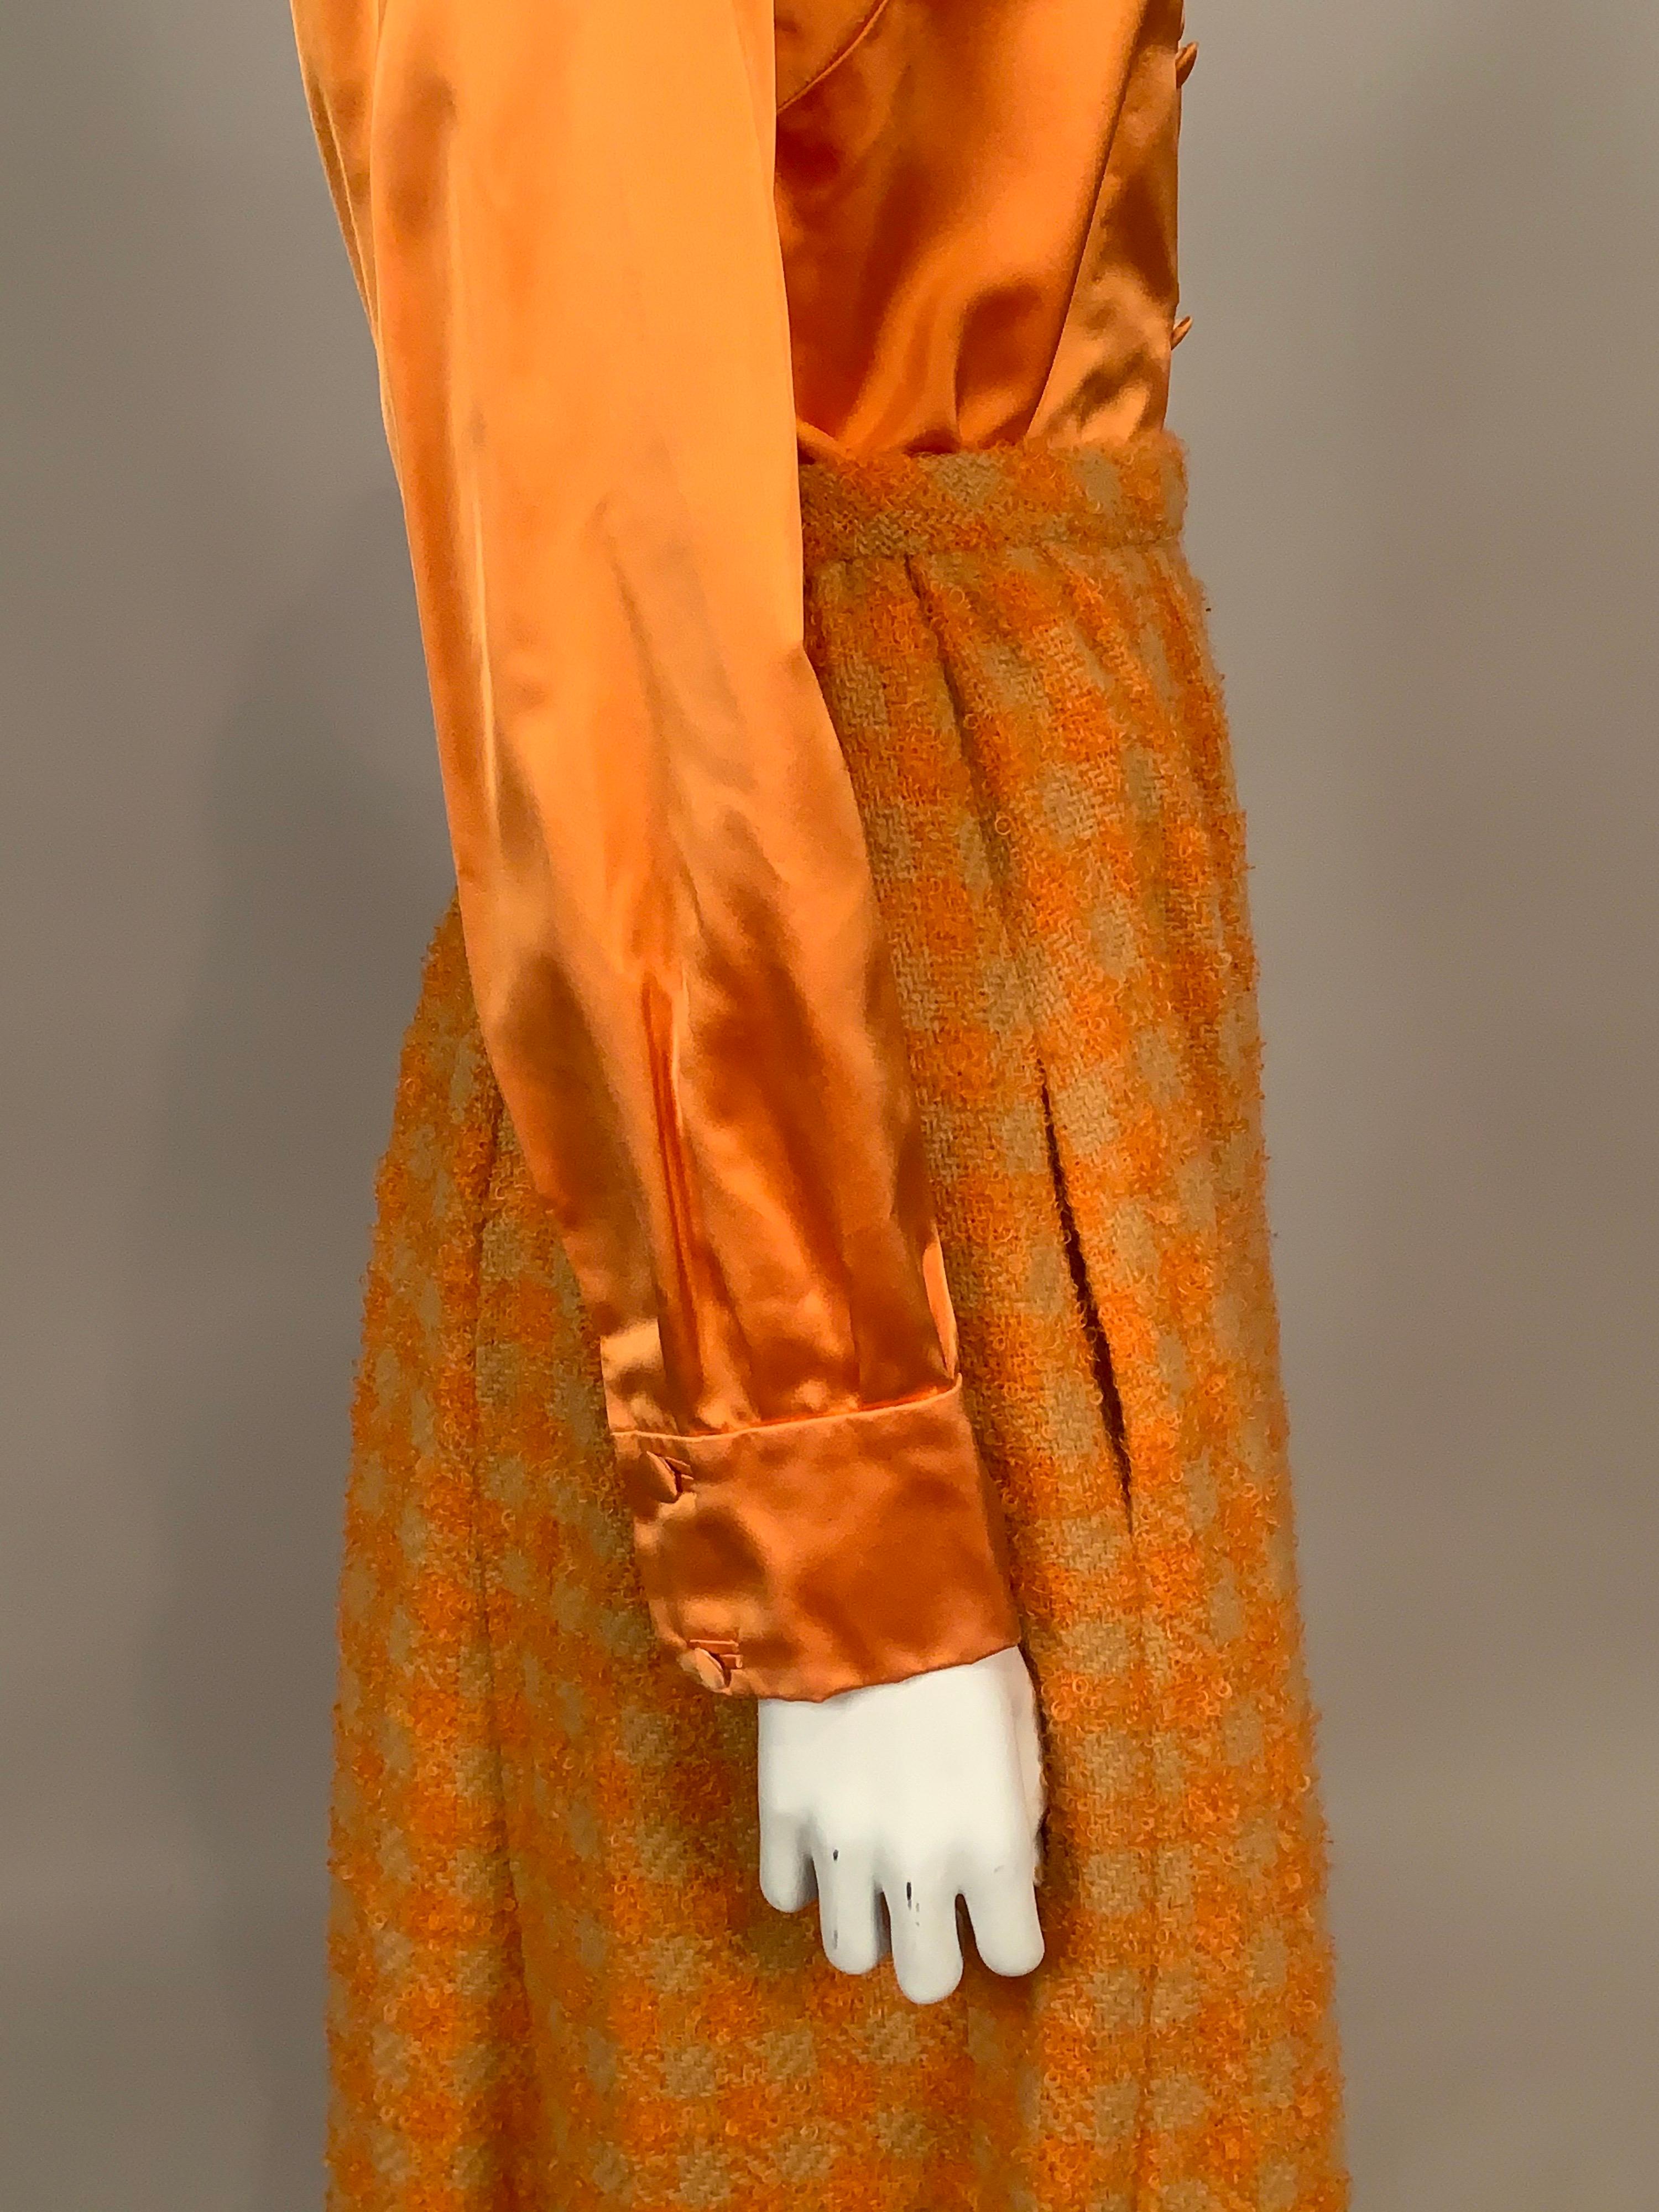 Orange Sybil Connolly Haute Couture Silk Satin Blouse and Hand Loomed Irish Wool Skirt